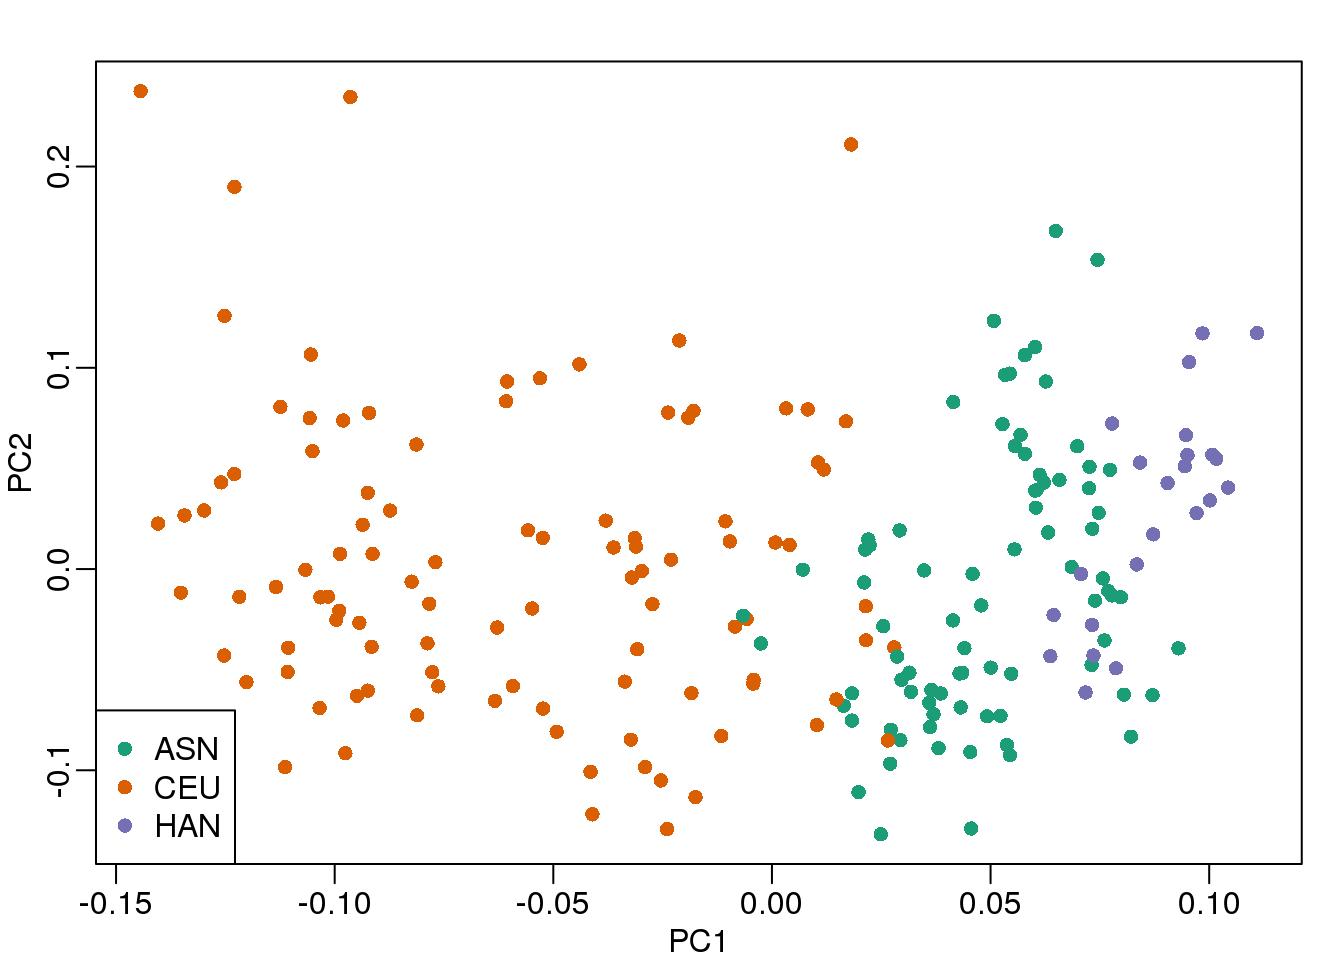 First two PCs for gene expression data with color representing ethnicity.